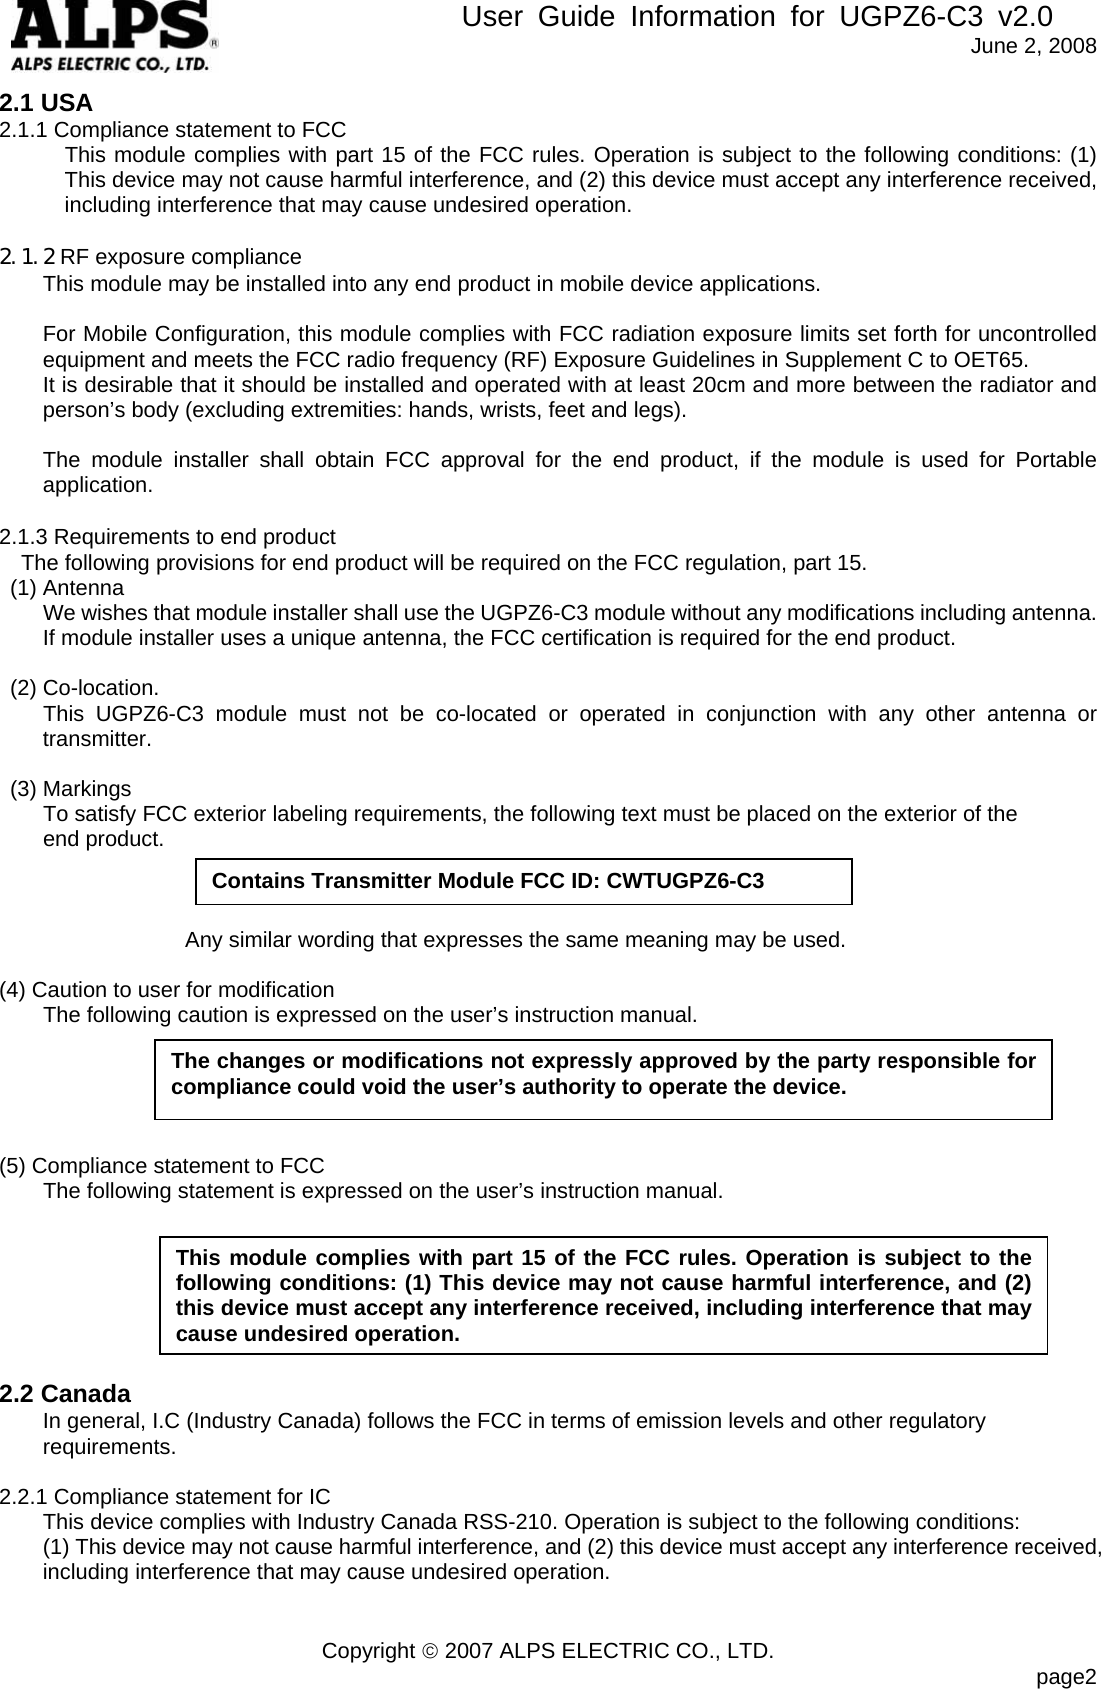        User Guide Information for UGPZ6-C3 v2.0               June 2, 2008 Copyright © 2007 ALPS ELECTRIC CO., LTD.                            page2 2.1 USA 2.1.1 Compliance statement to FCC This module complies with part 15 of the FCC rules. Operation is subject to the following conditions: (1) This device may not cause harmful interference, and (2) this device must accept any interference received, including interference that may cause undesired operation.  2.1.2 RF exposure compliance This module may be installed into any end product in mobile device applications.    For Mobile Configuration, this module complies with FCC radiation exposure limits set forth for uncontrolled equipment and meets the FCC radio frequency (RF) Exposure Guidelines in Supplement C to OET65.   It is desirable that it should be installed and operated with at least 20cm and more between the radiator and person’s body (excluding extremities: hands, wrists, feet and legs).     The module installer shall obtain FCC approval for the end product, if the module is used for Portable application.  2.1.3 Requirements to end product The following provisions for end product will be required on the FCC regulation, part 15.  (1) Antenna         We wishes that module installer shall use the UGPZ6-C3 module without any modifications including antenna.     If module installer uses a unique antenna, the FCC certification is required for the end product.   (2) Co-location.     This UGPZ6-C3 module must not be co-located or operated in conjunction with any other antenna or transmitter.   (3) Markings         To satisfy FCC exterior labeling requirements, the following text must be placed on the exterior of the       end product.                                    Any similar wording that expresses the same meaning may be used.  (4) Caution to user for modification         The following caution is expressed on the user’s instruction manual.      (5) Compliance statement to FCC         The following statement is expressed on the user’s instruction manual.                                                             2.2 Canada In general, I.C (Industry Canada) follows the FCC in terms of emission levels and other regulatory requirements.  2.2.1 Compliance statement for IC This device complies with Industry Canada RSS-210. Operation is subject to the following conditions:   (1) This device may not cause harmful interference, and (2) this device must accept any interference received, including interference that may cause undesired operation.   The changes or modifications not expressly approved by the party responsible for compliance could void the user’s authority to operate the device. This module complies with part 15 of the FCC rules. Operation is subject to the following conditions: (1) This device may not cause harmful interference, and (2) this device must accept any interference received, including interference that may cause undesired operation.Contains Transmitter Module FCC ID: CWTUGPZ6-C3 